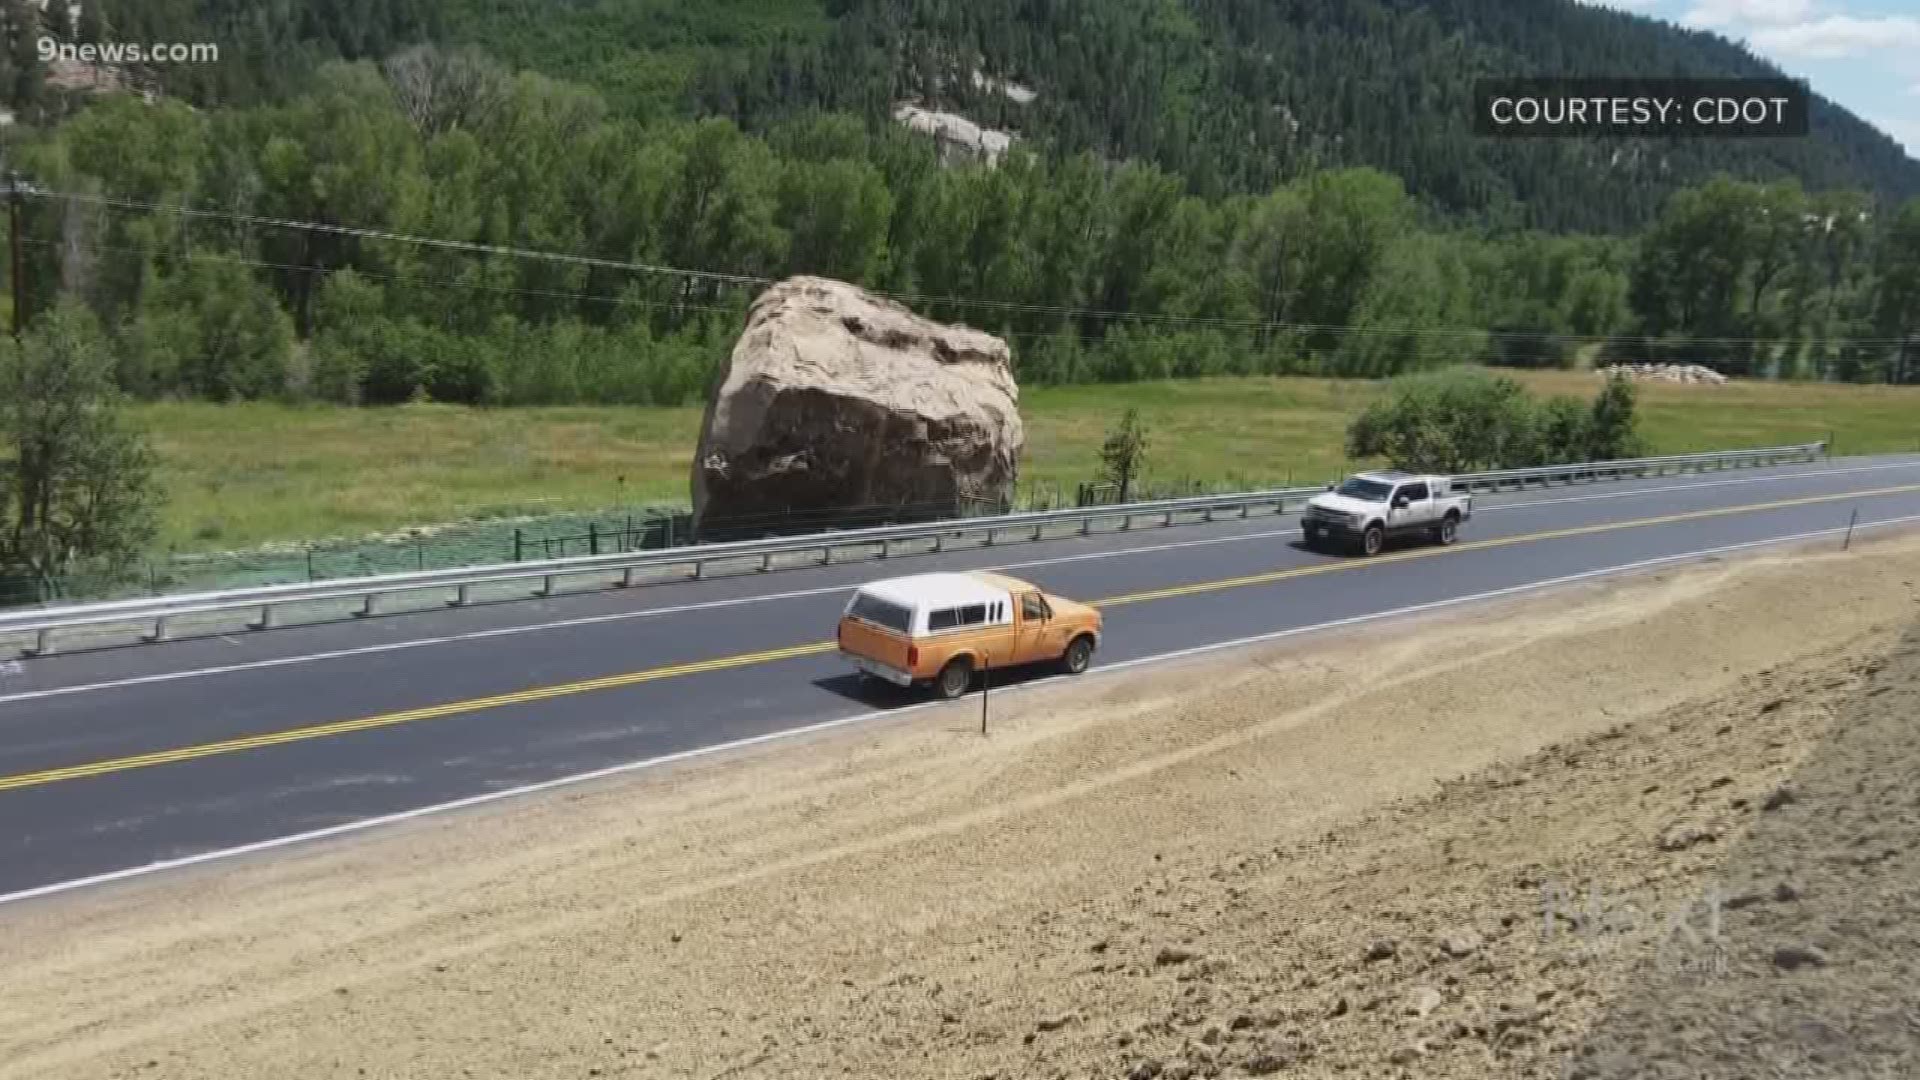 CDOT spent the last 9 weeks rebuilding a road around the massive boulder. Governor Polis says leaving the rock there saved taxpayers about $200,000.